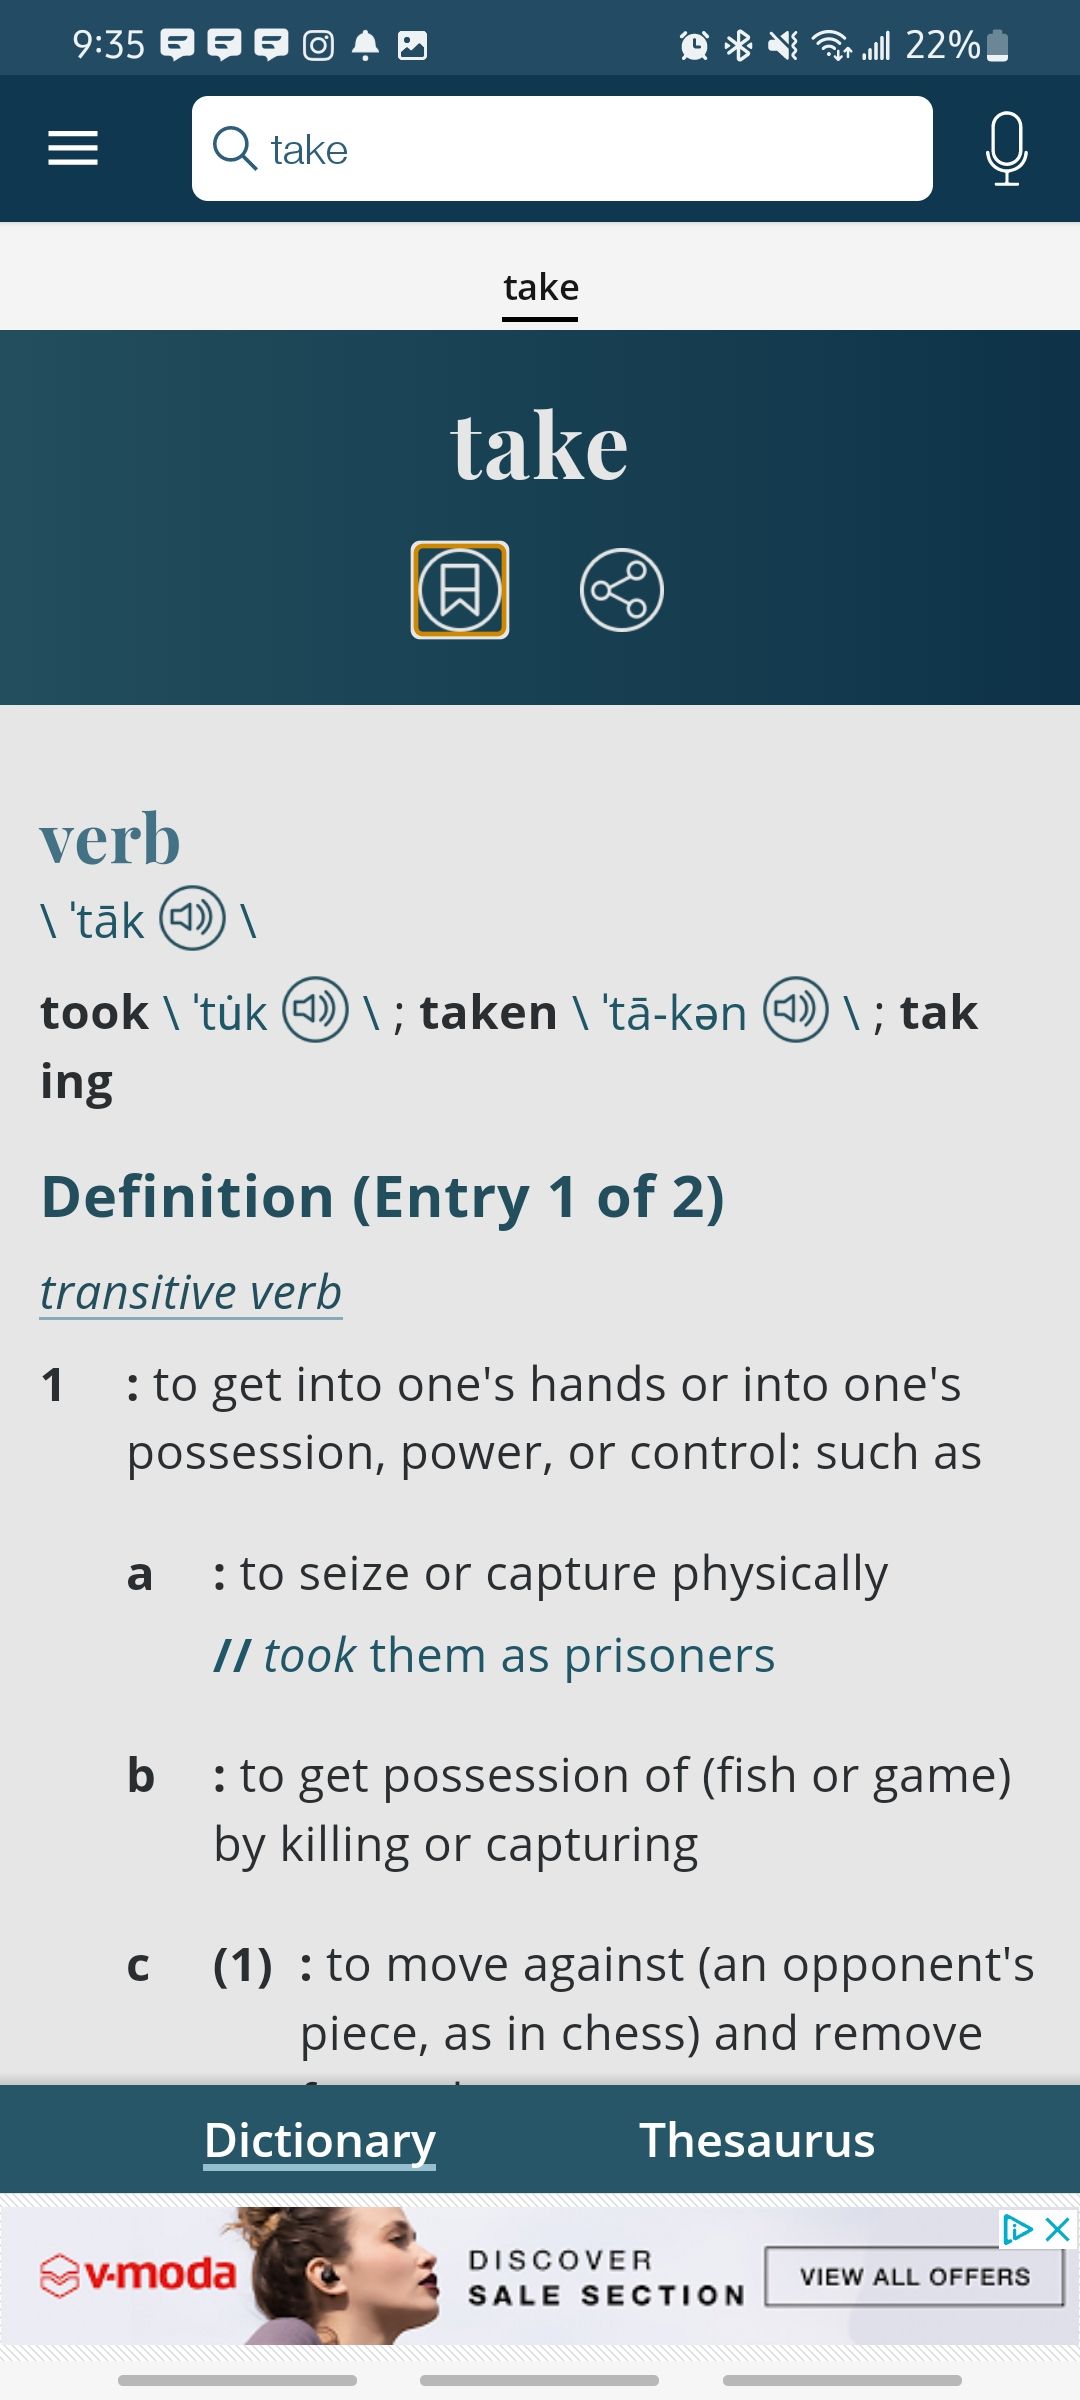 Dictionary definitions for the verb take in the Merriam-Webster app